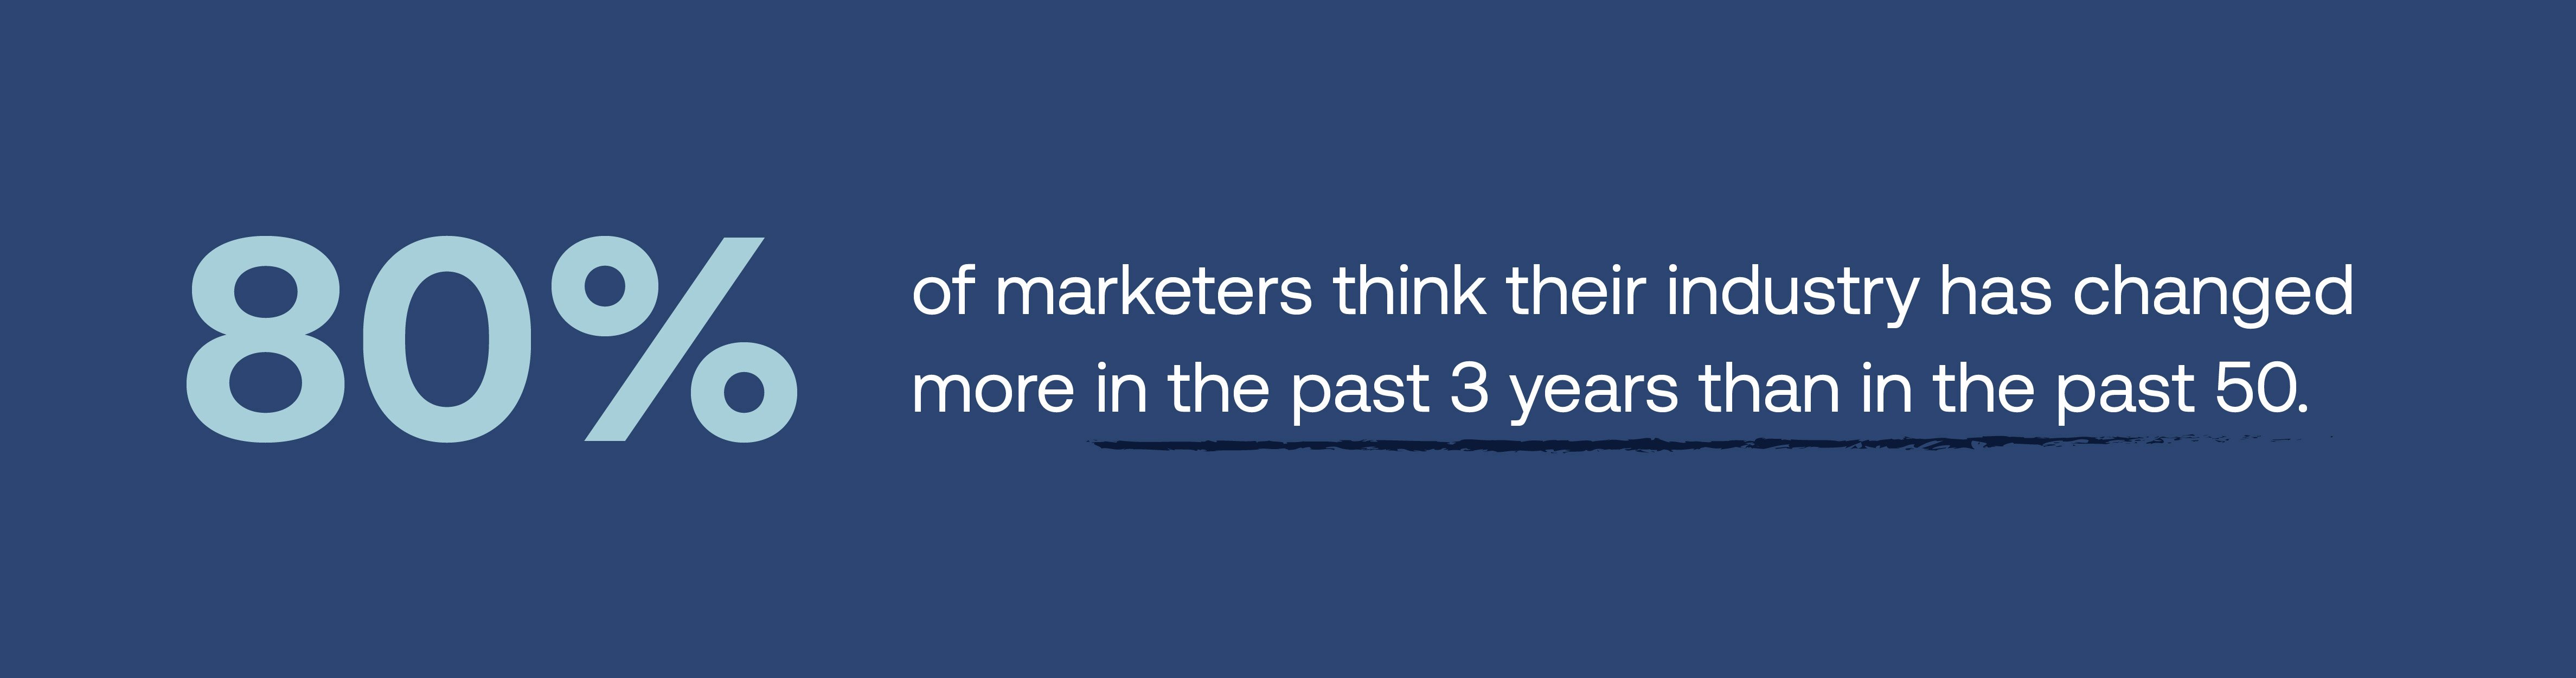 recent research suggests that 80% of marketers think their industry has changed a lot